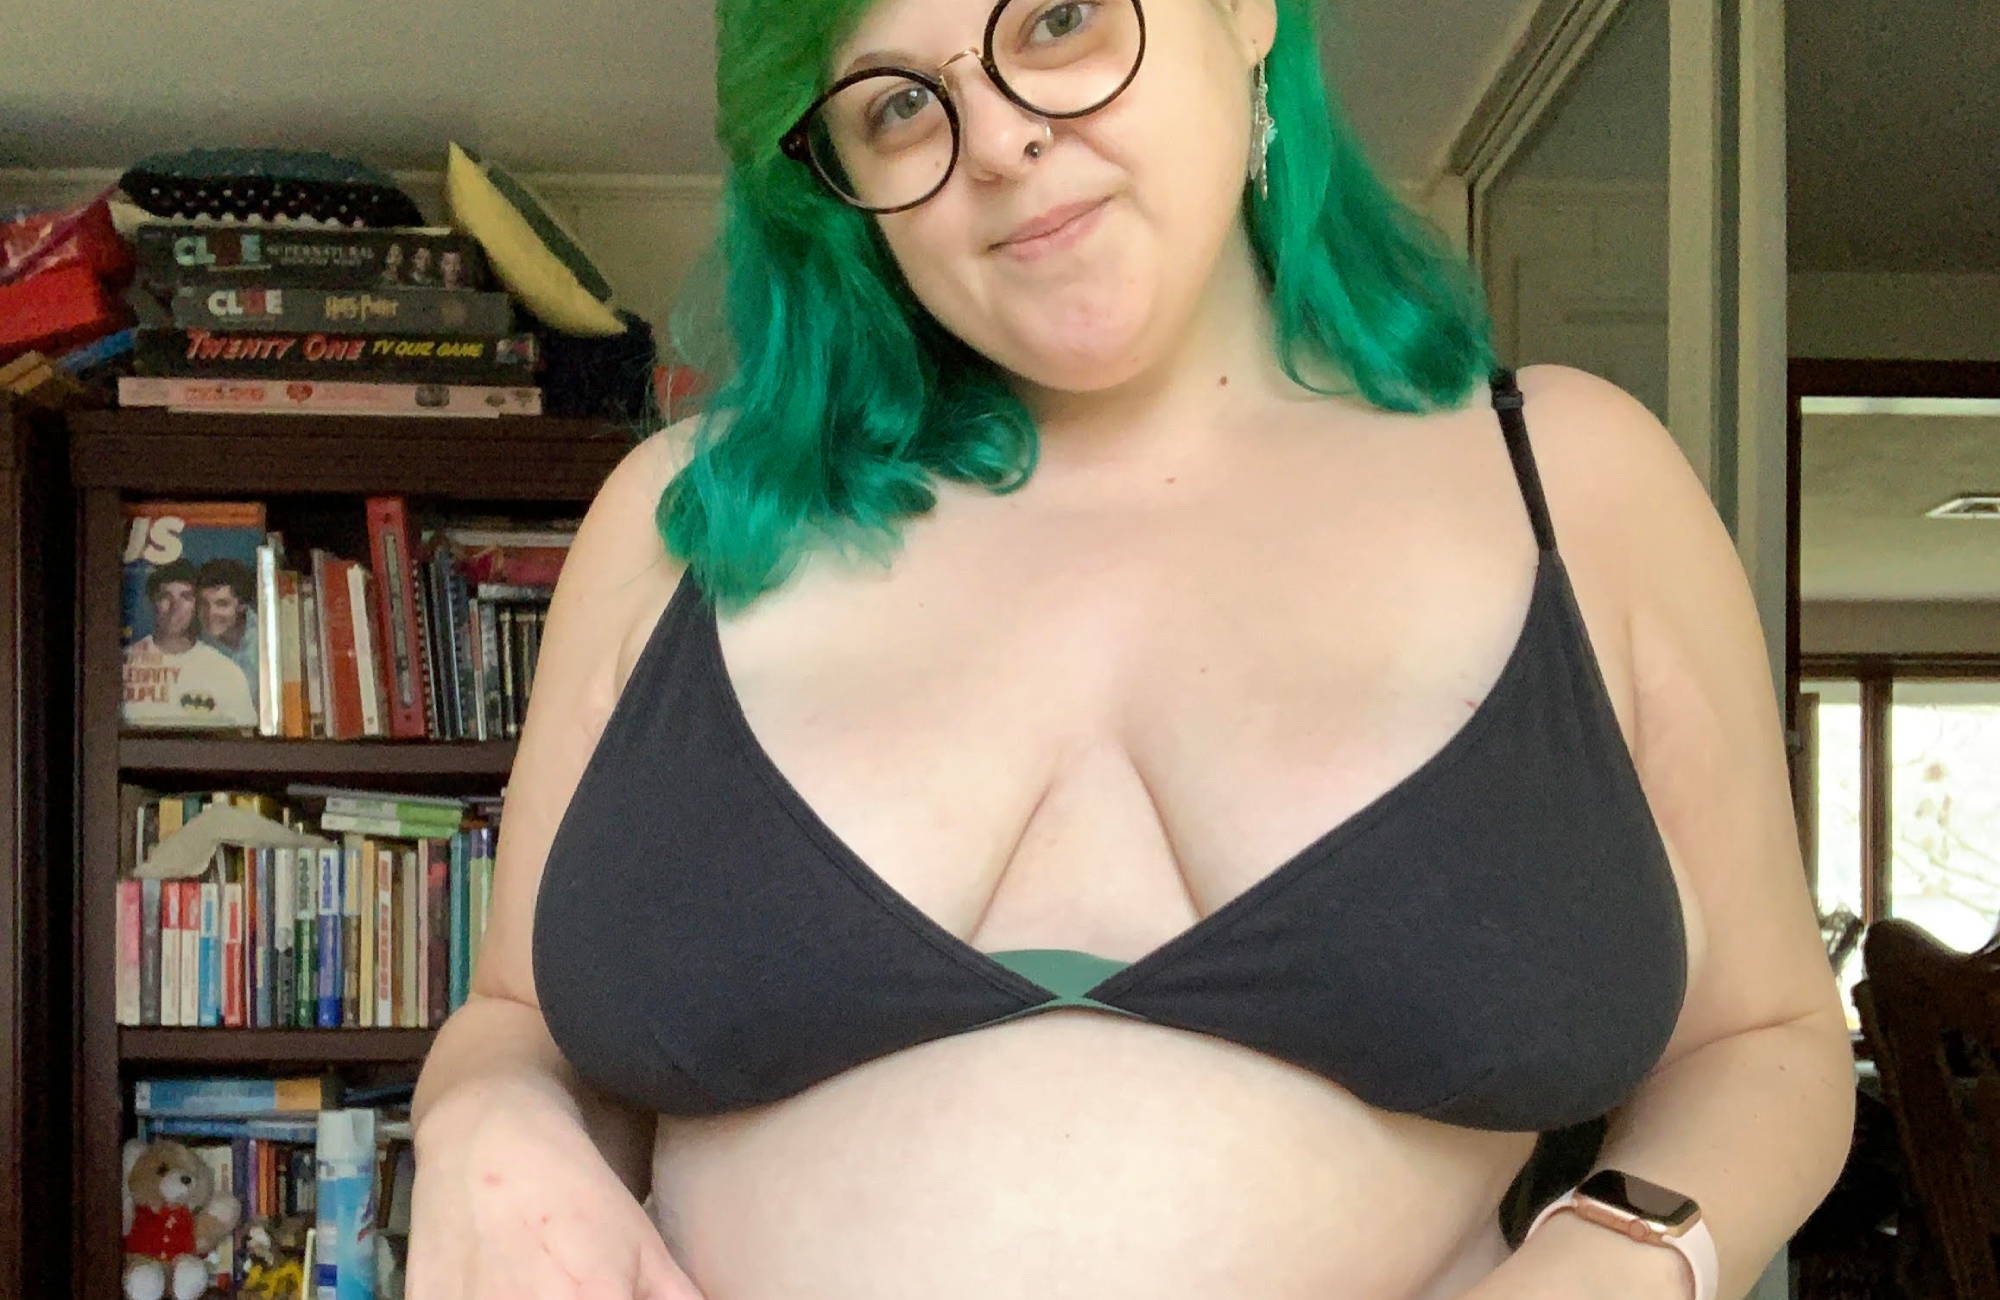 A woman with green hair and circle glasses in a black bralette stands in front of a bookshelf